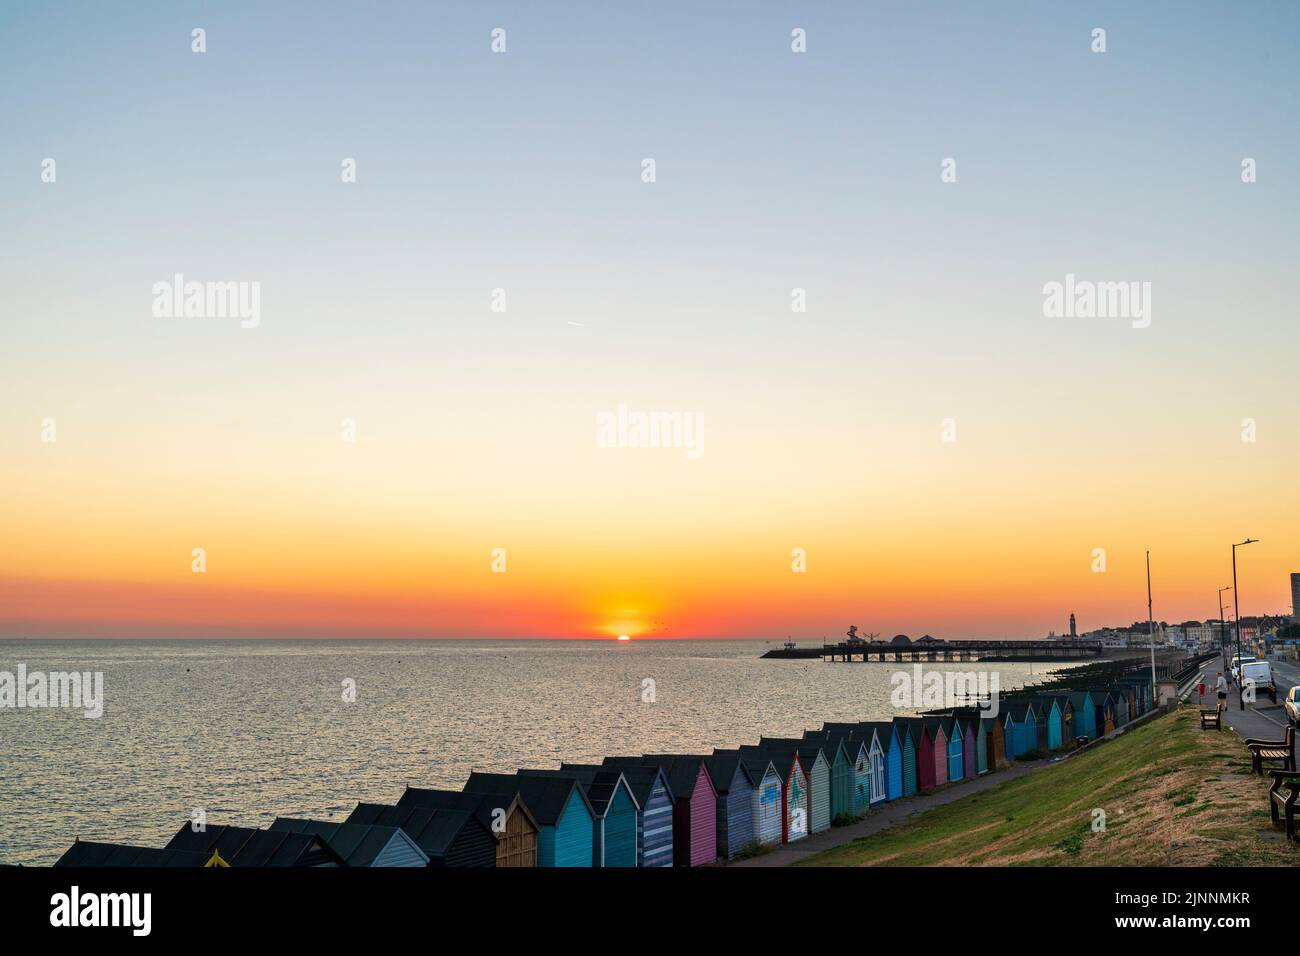 Sunrise over the North sea at Herne Bay in Kent. Sun rising above the sea with the silhouette of the Herne Bay pier and harbour jetty. Sky is orange turning gradually into blue. A row of multi-coloured beach huts in the foreground. Stock Photo